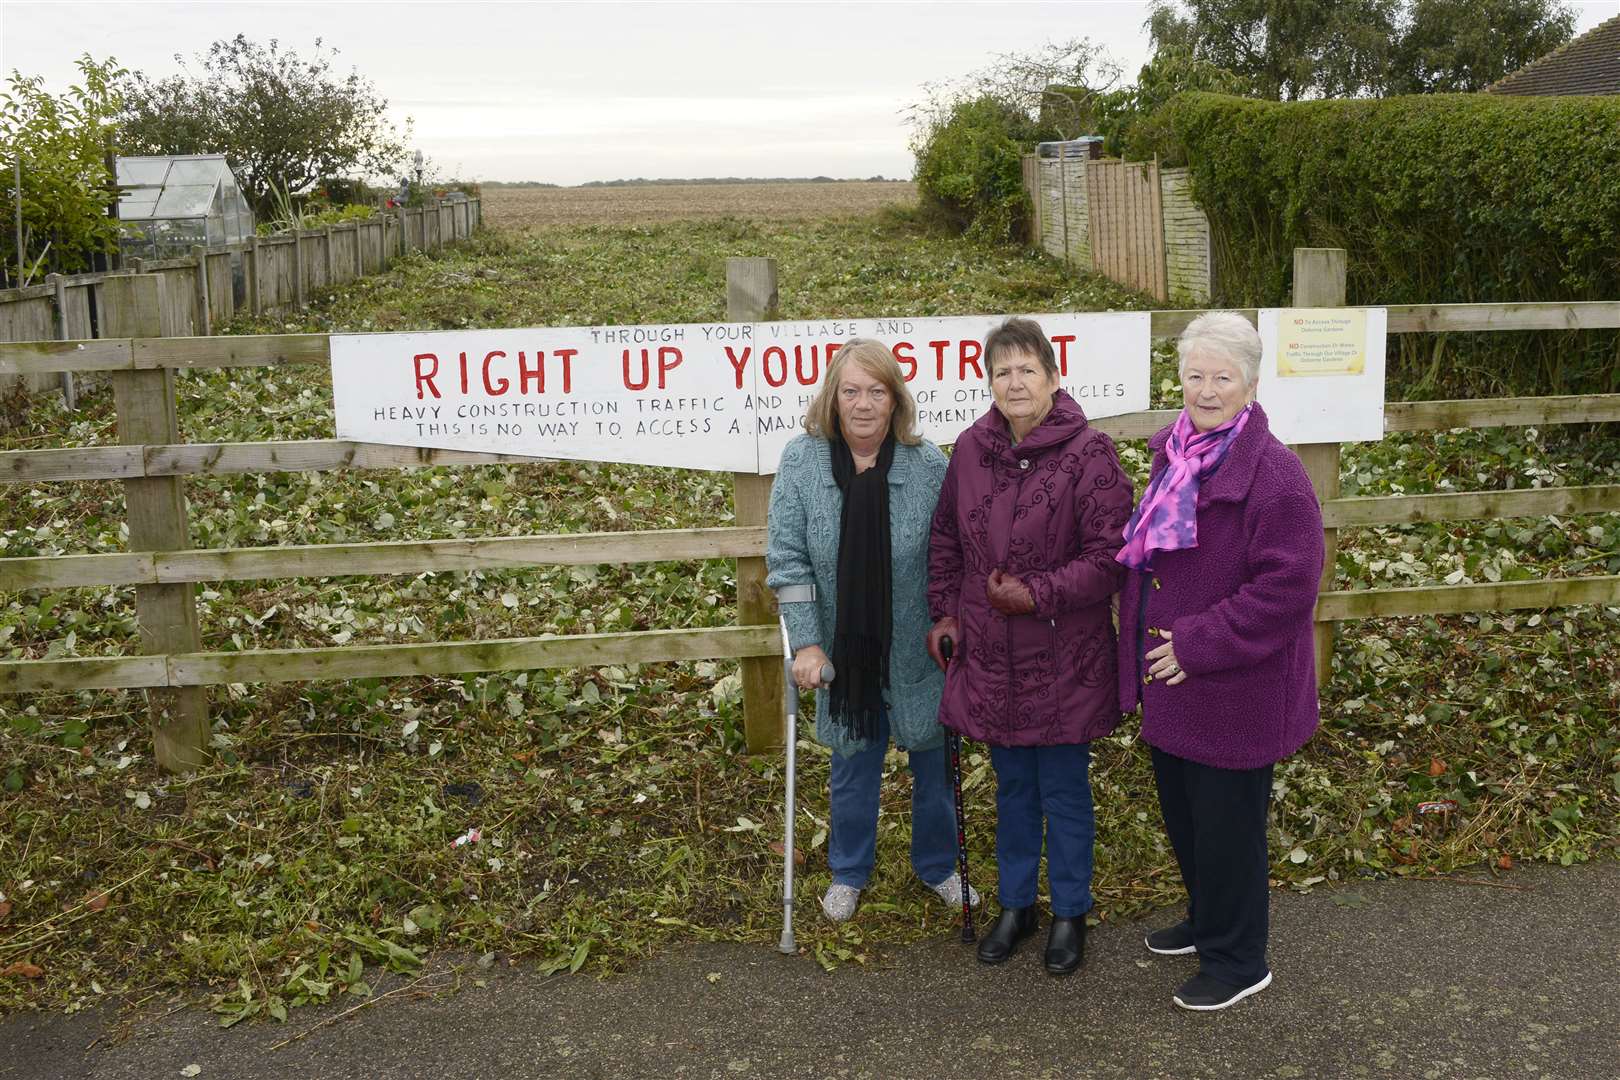 Villagers Veronica Lewis, Maria Stewart and Jackie Weeden by one of the proposed entrances to the new development